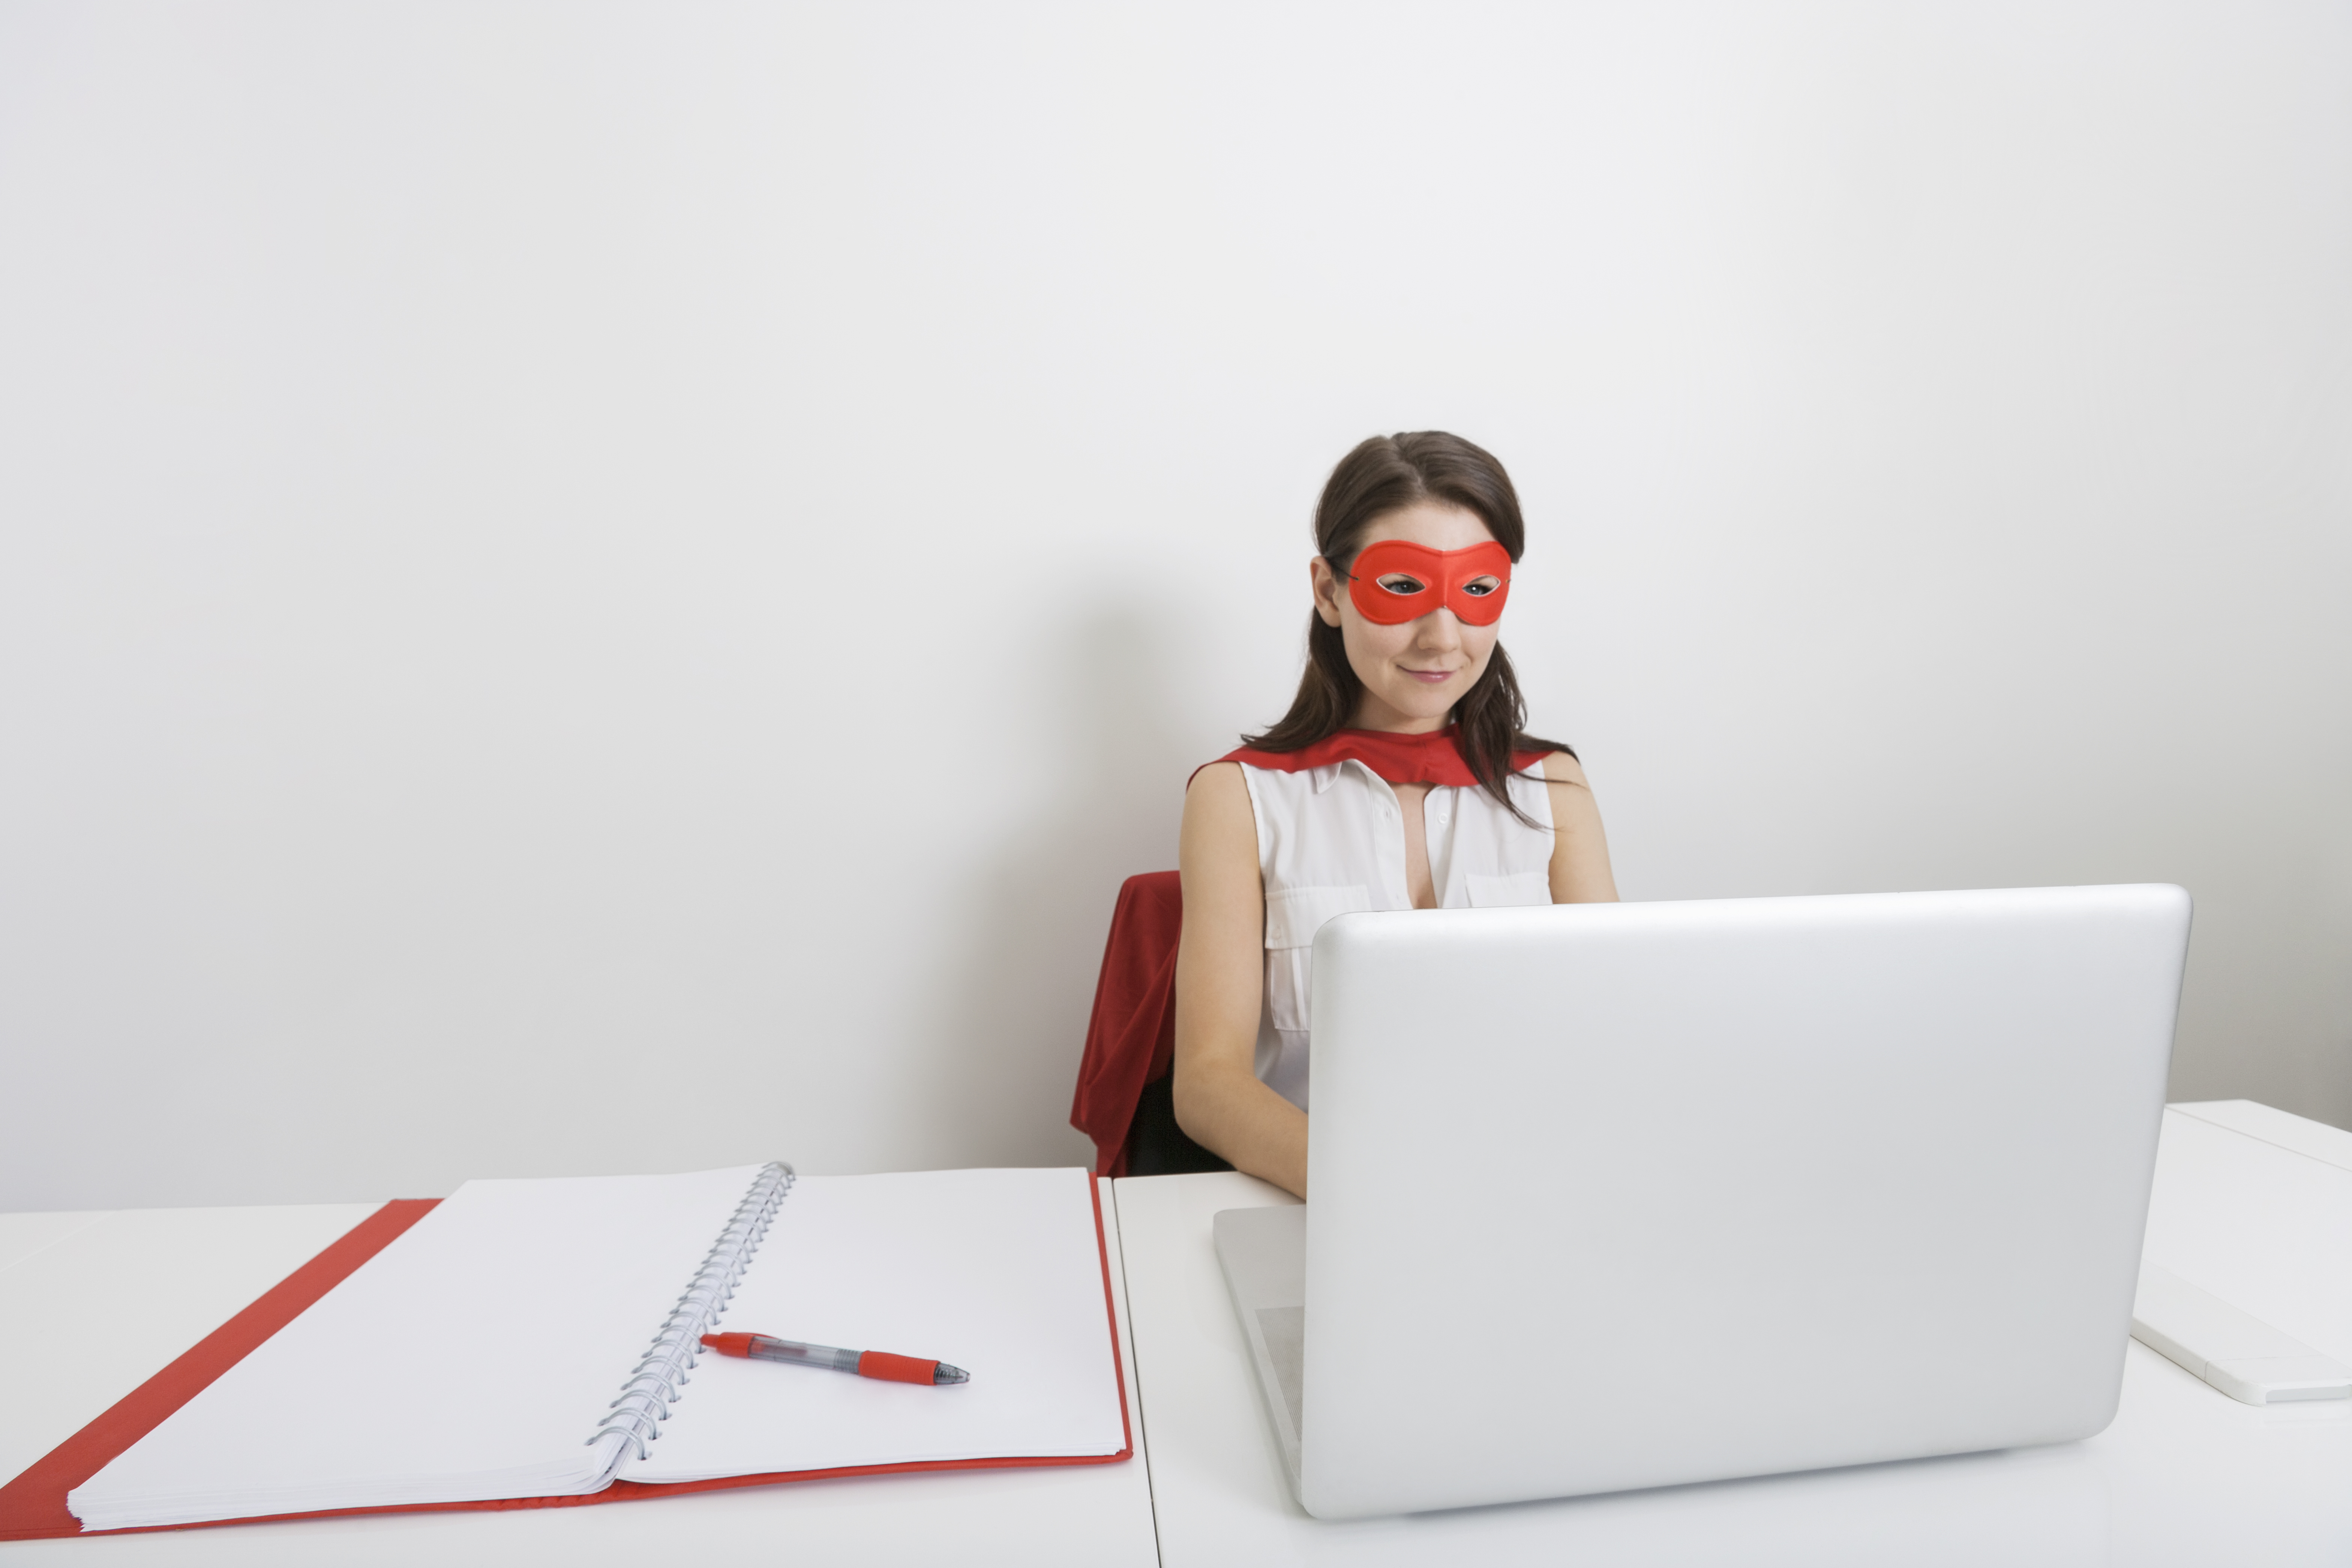 Young woman wearing red eye mask and focusing on white computer with notebook and pen beside her